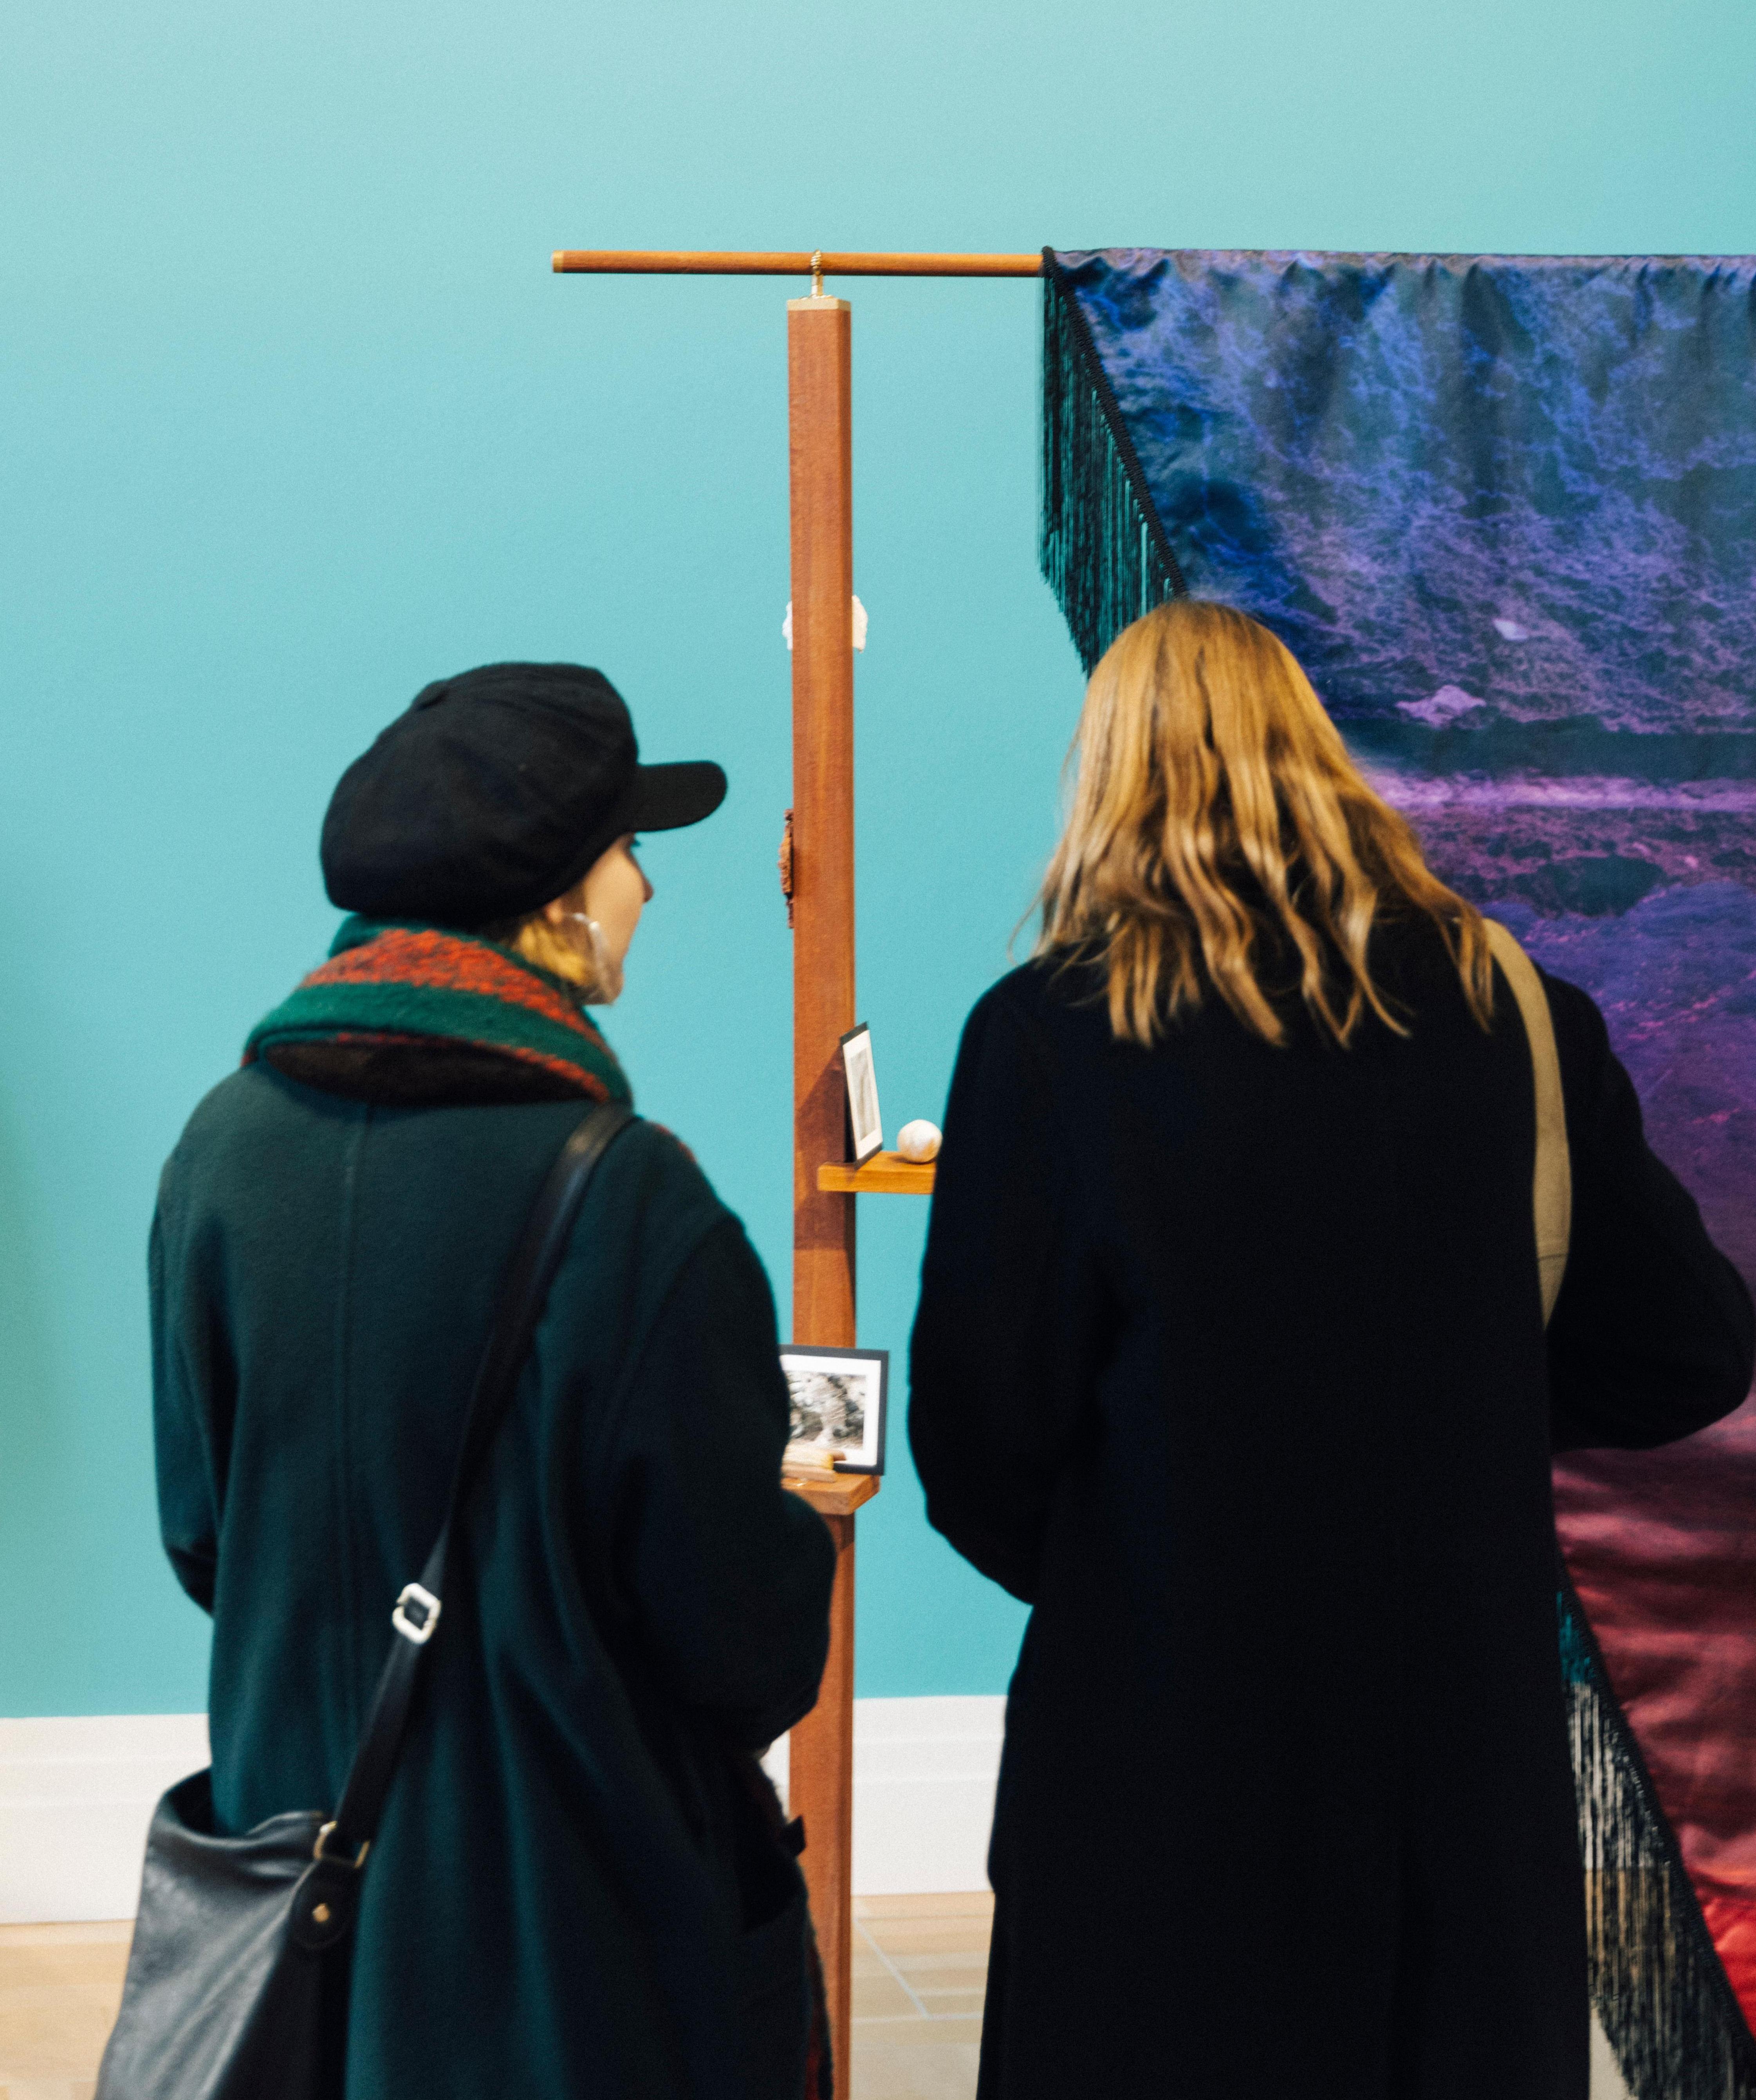 Two people are looking at a work by the artist Shiraz Bayjoo. The sculptural work consists of textile flags. The wall in the background is turquoise blue.